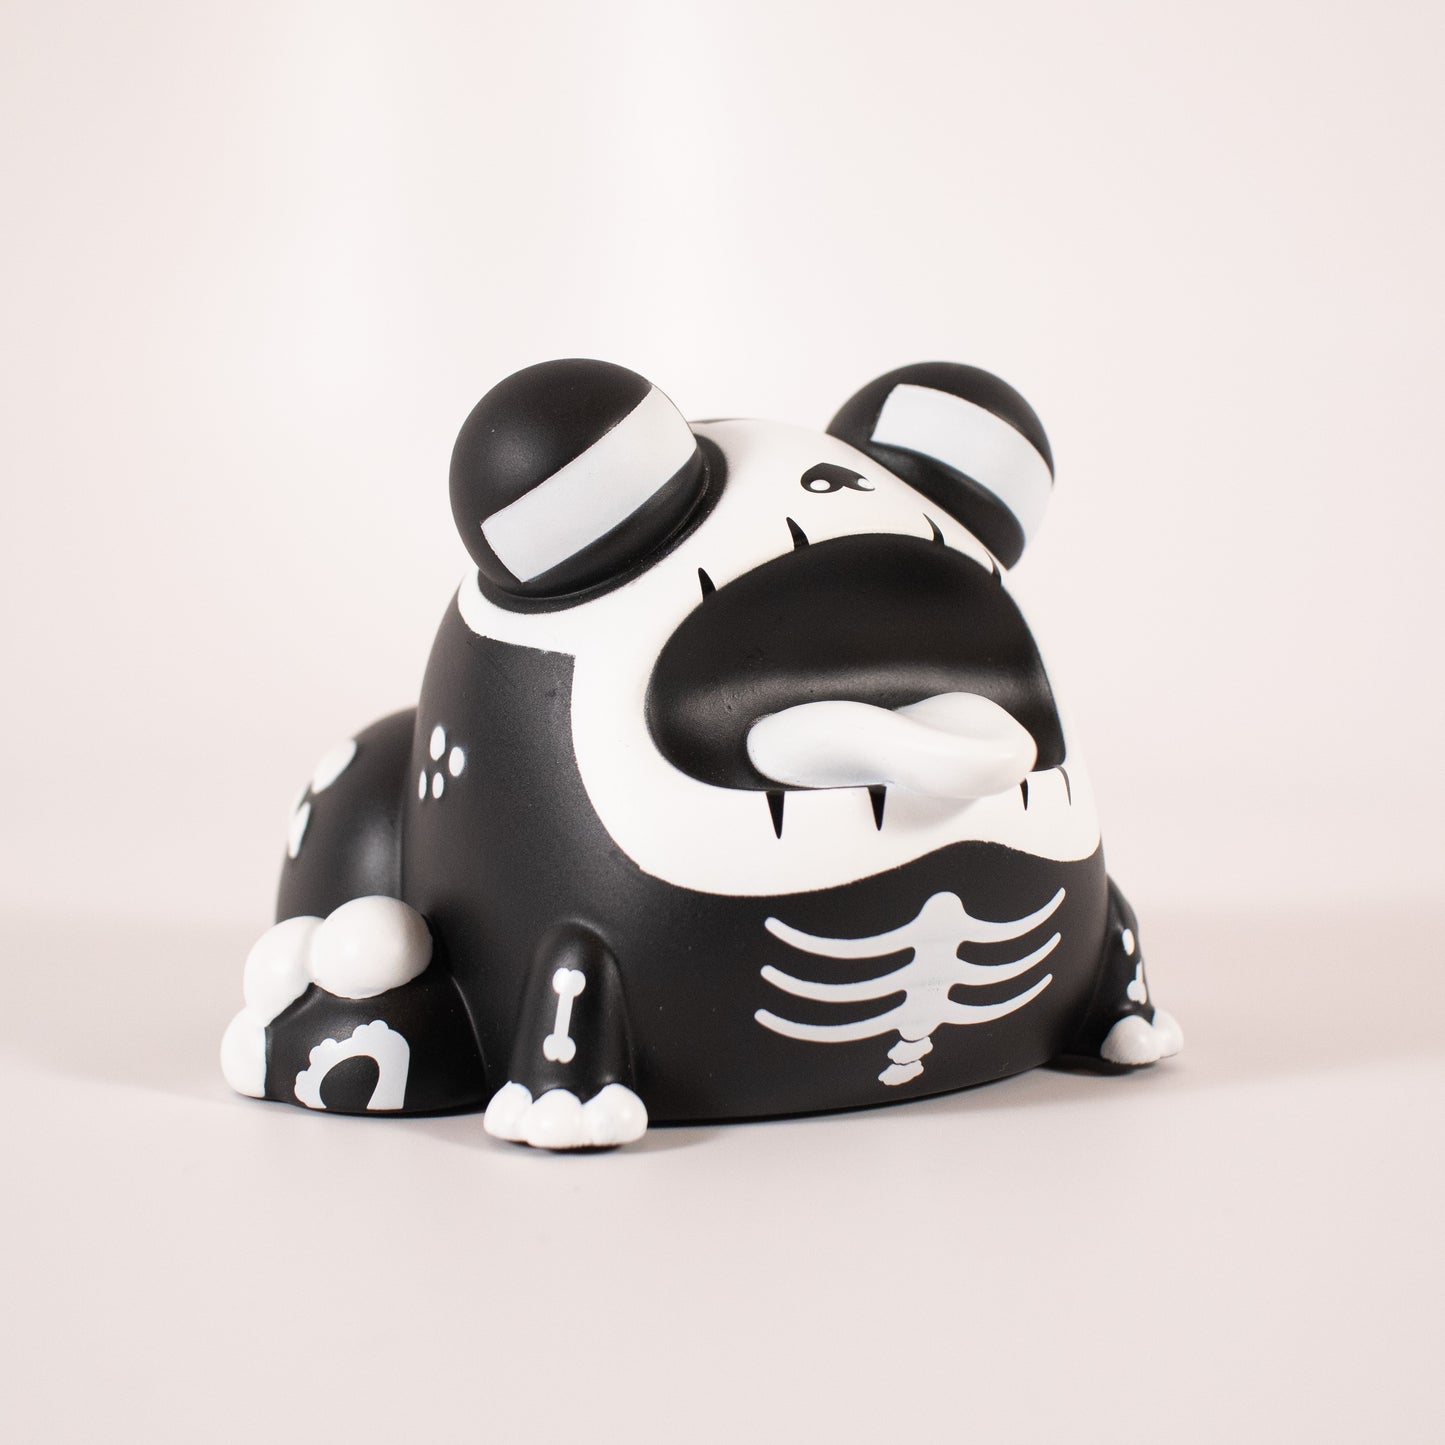 Ributt Croaked Limited Edition Vinyl Figure